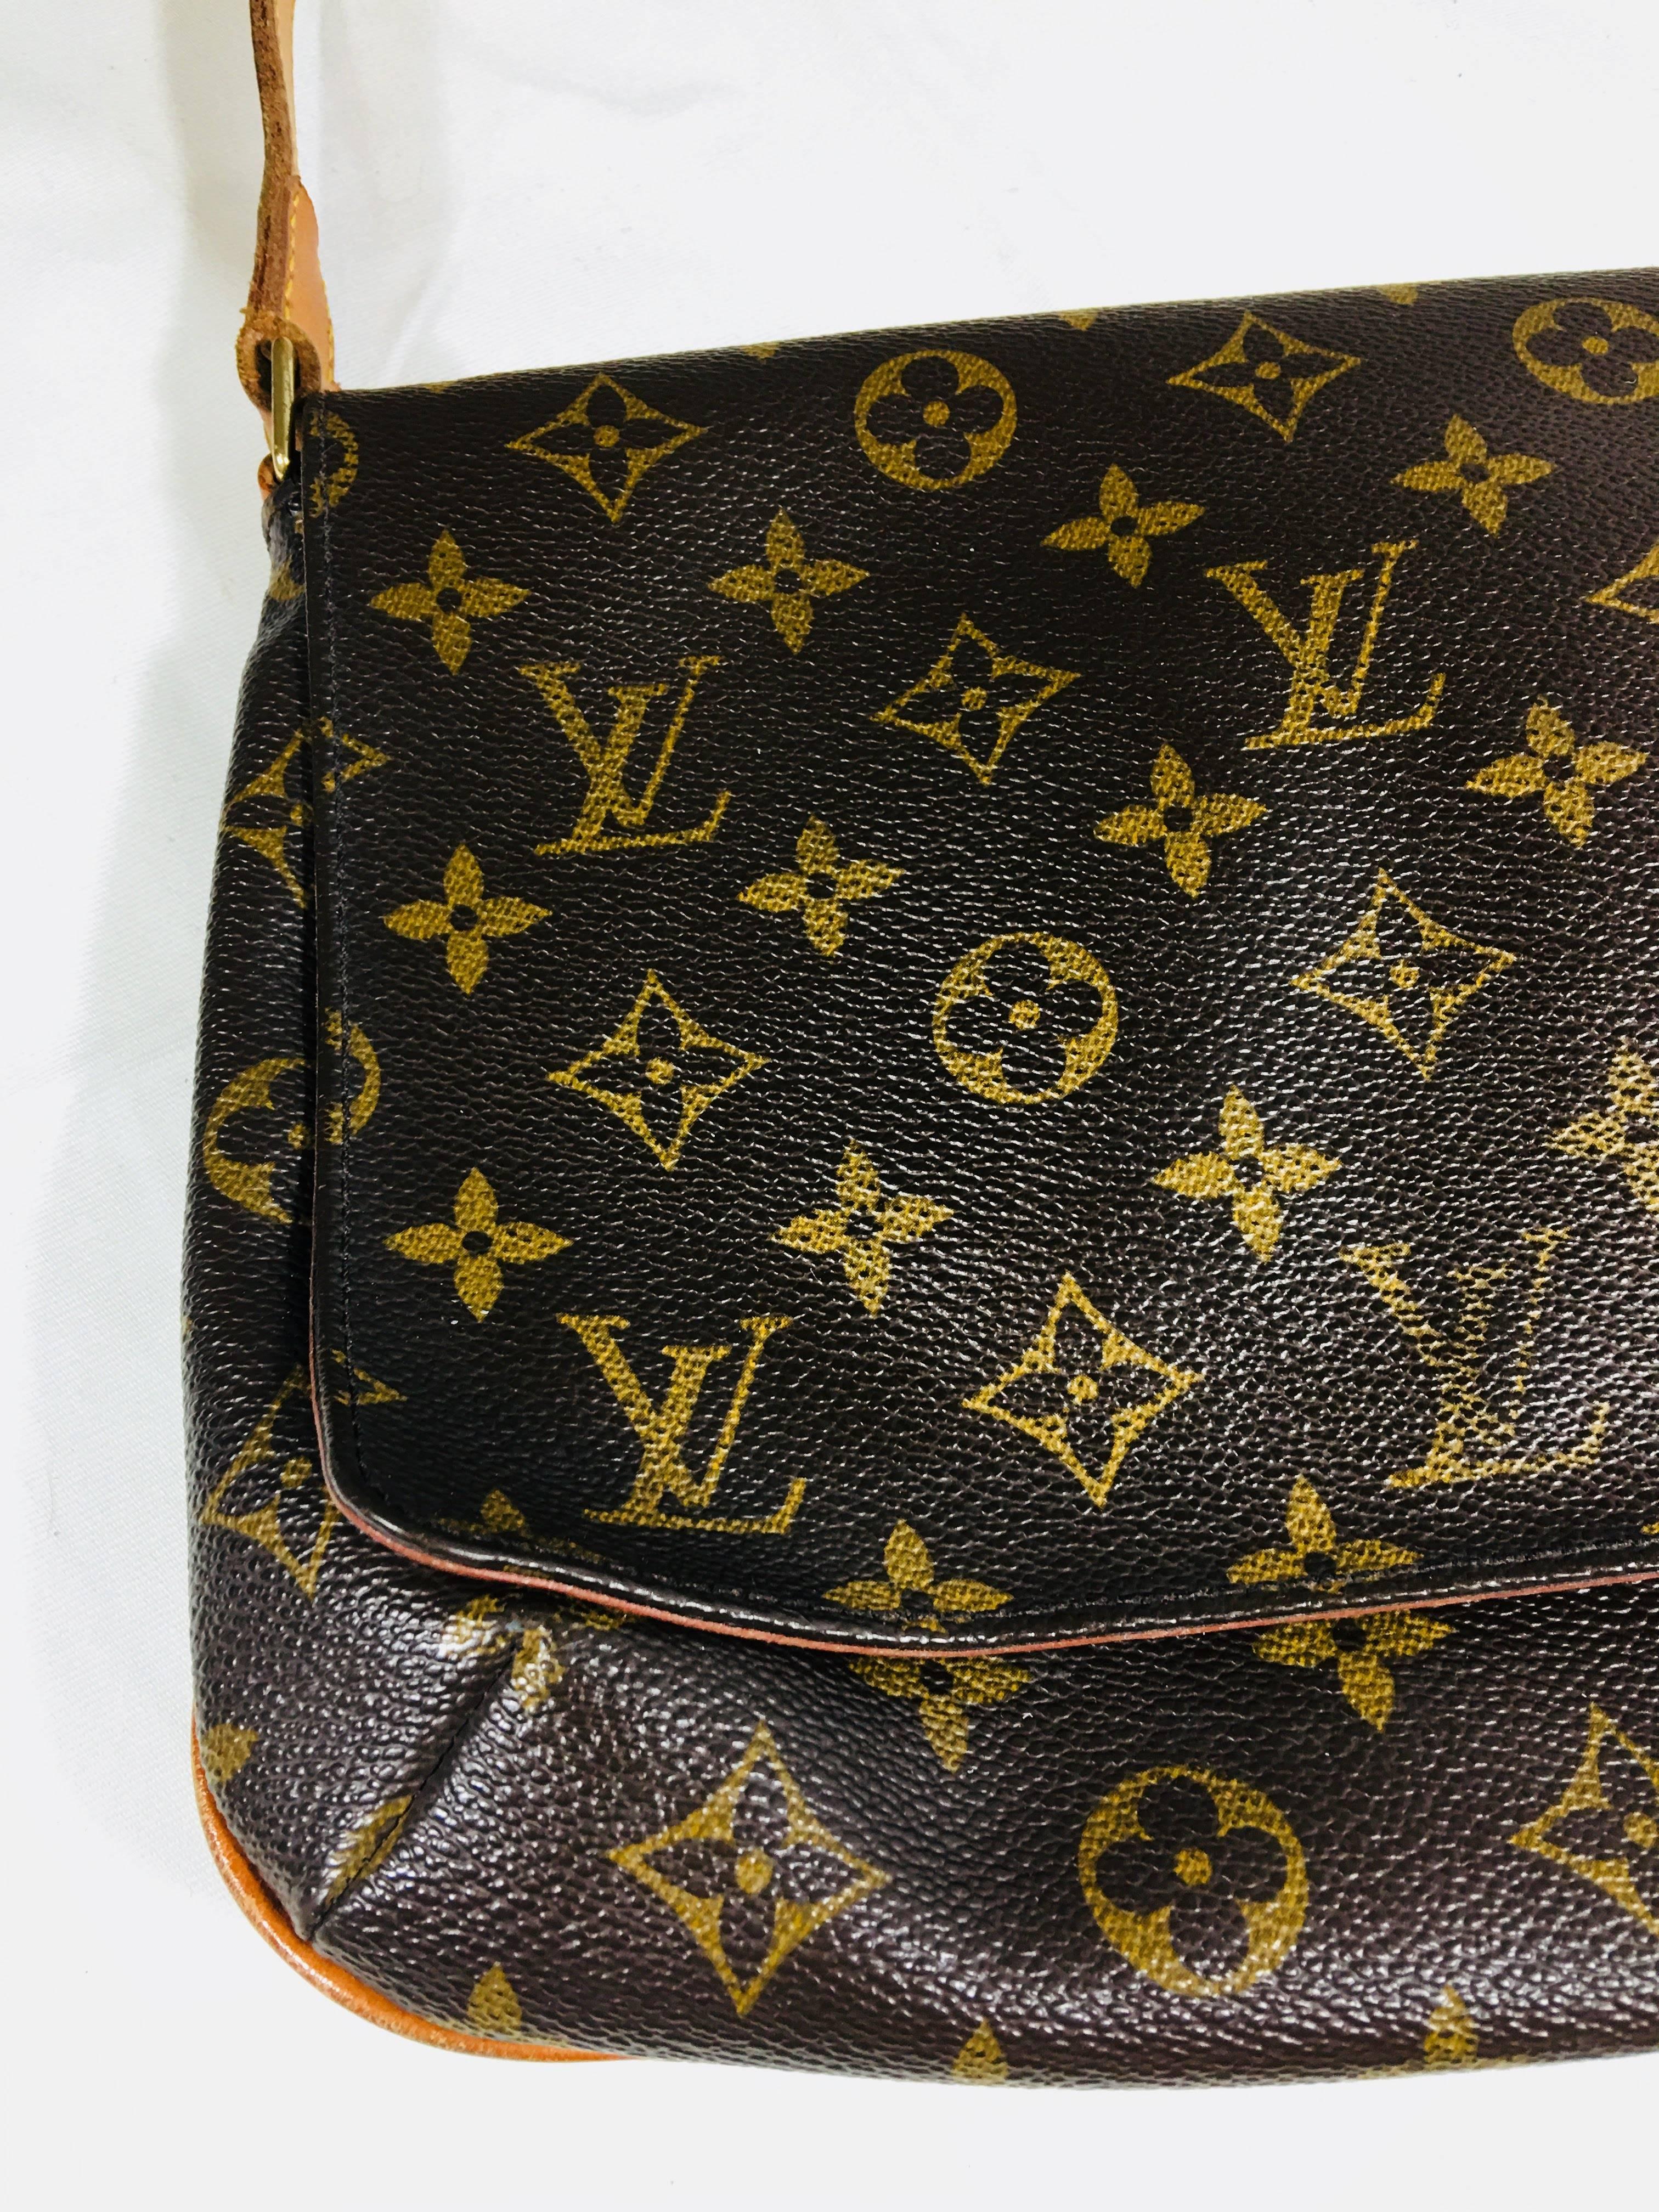 Louis Vuitton Monogram Shoulder Bag. Chocolate/Tan Leather with LV Monogram Throughout. Magnetic Closure, Leather Trim, and Gold Hardware.
Wear on Interior.